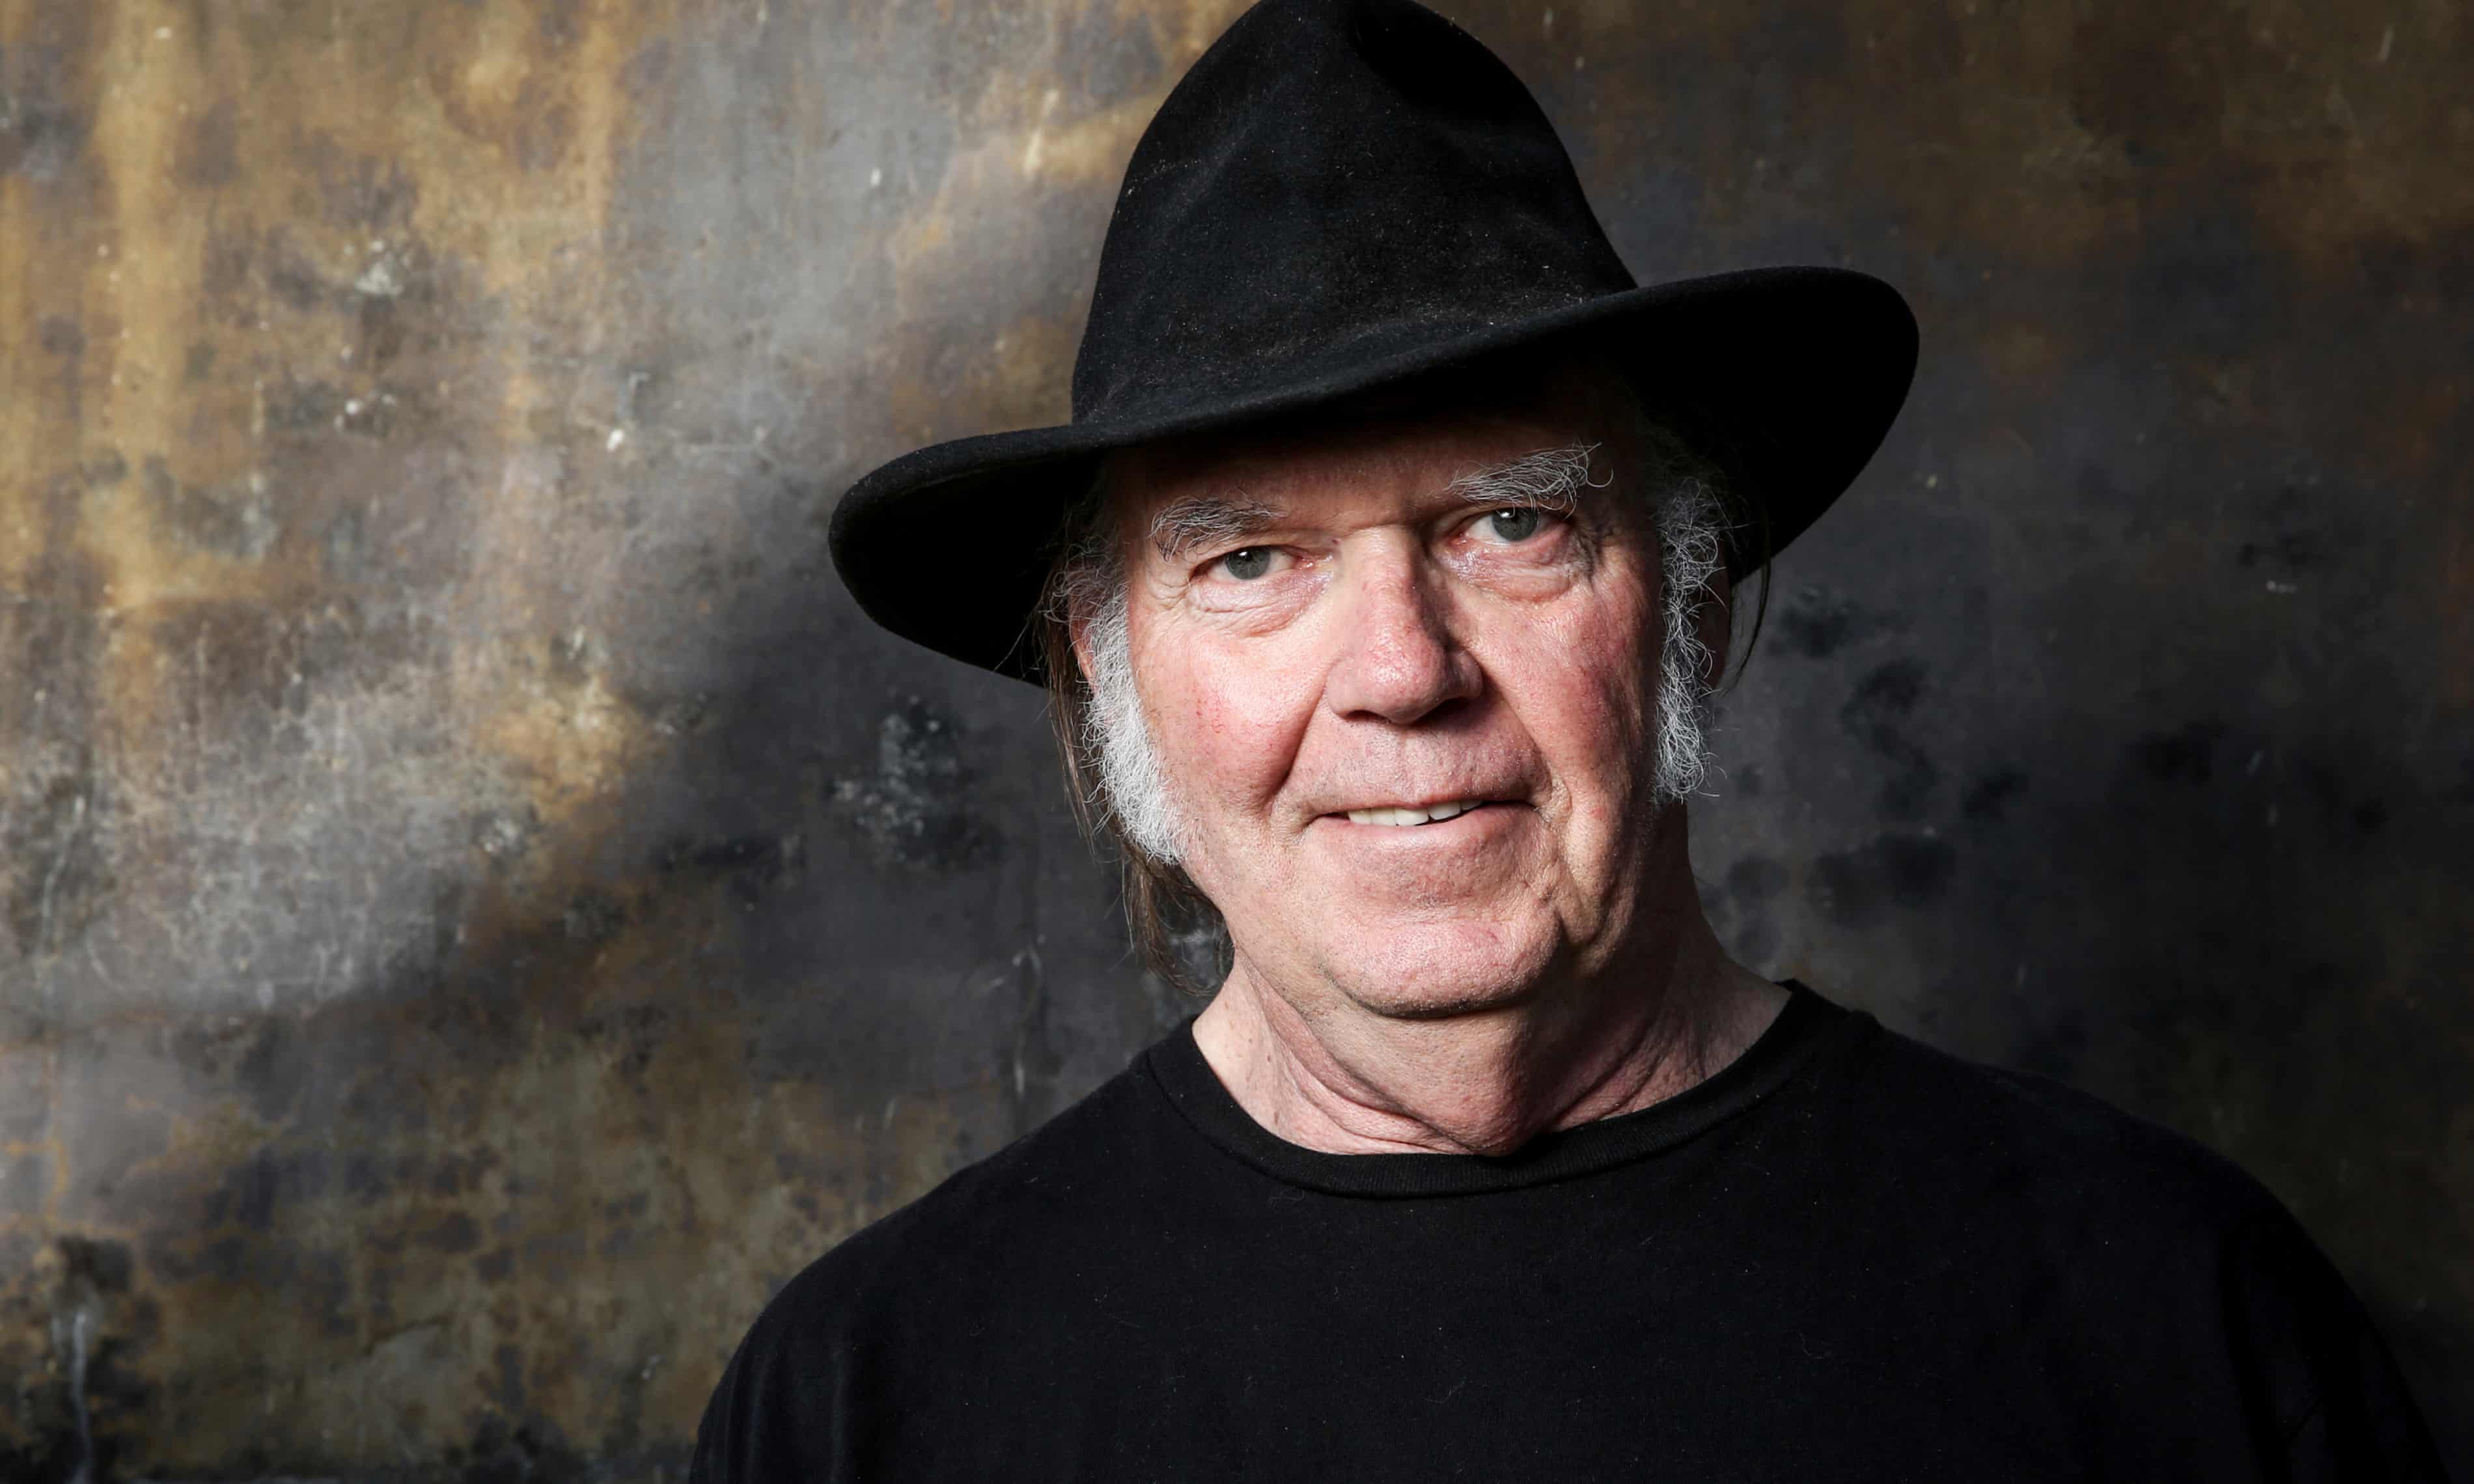 Neil Young to return music to Spotify as he attacks ‘disinformation’ across streaming services (theguardian.com)